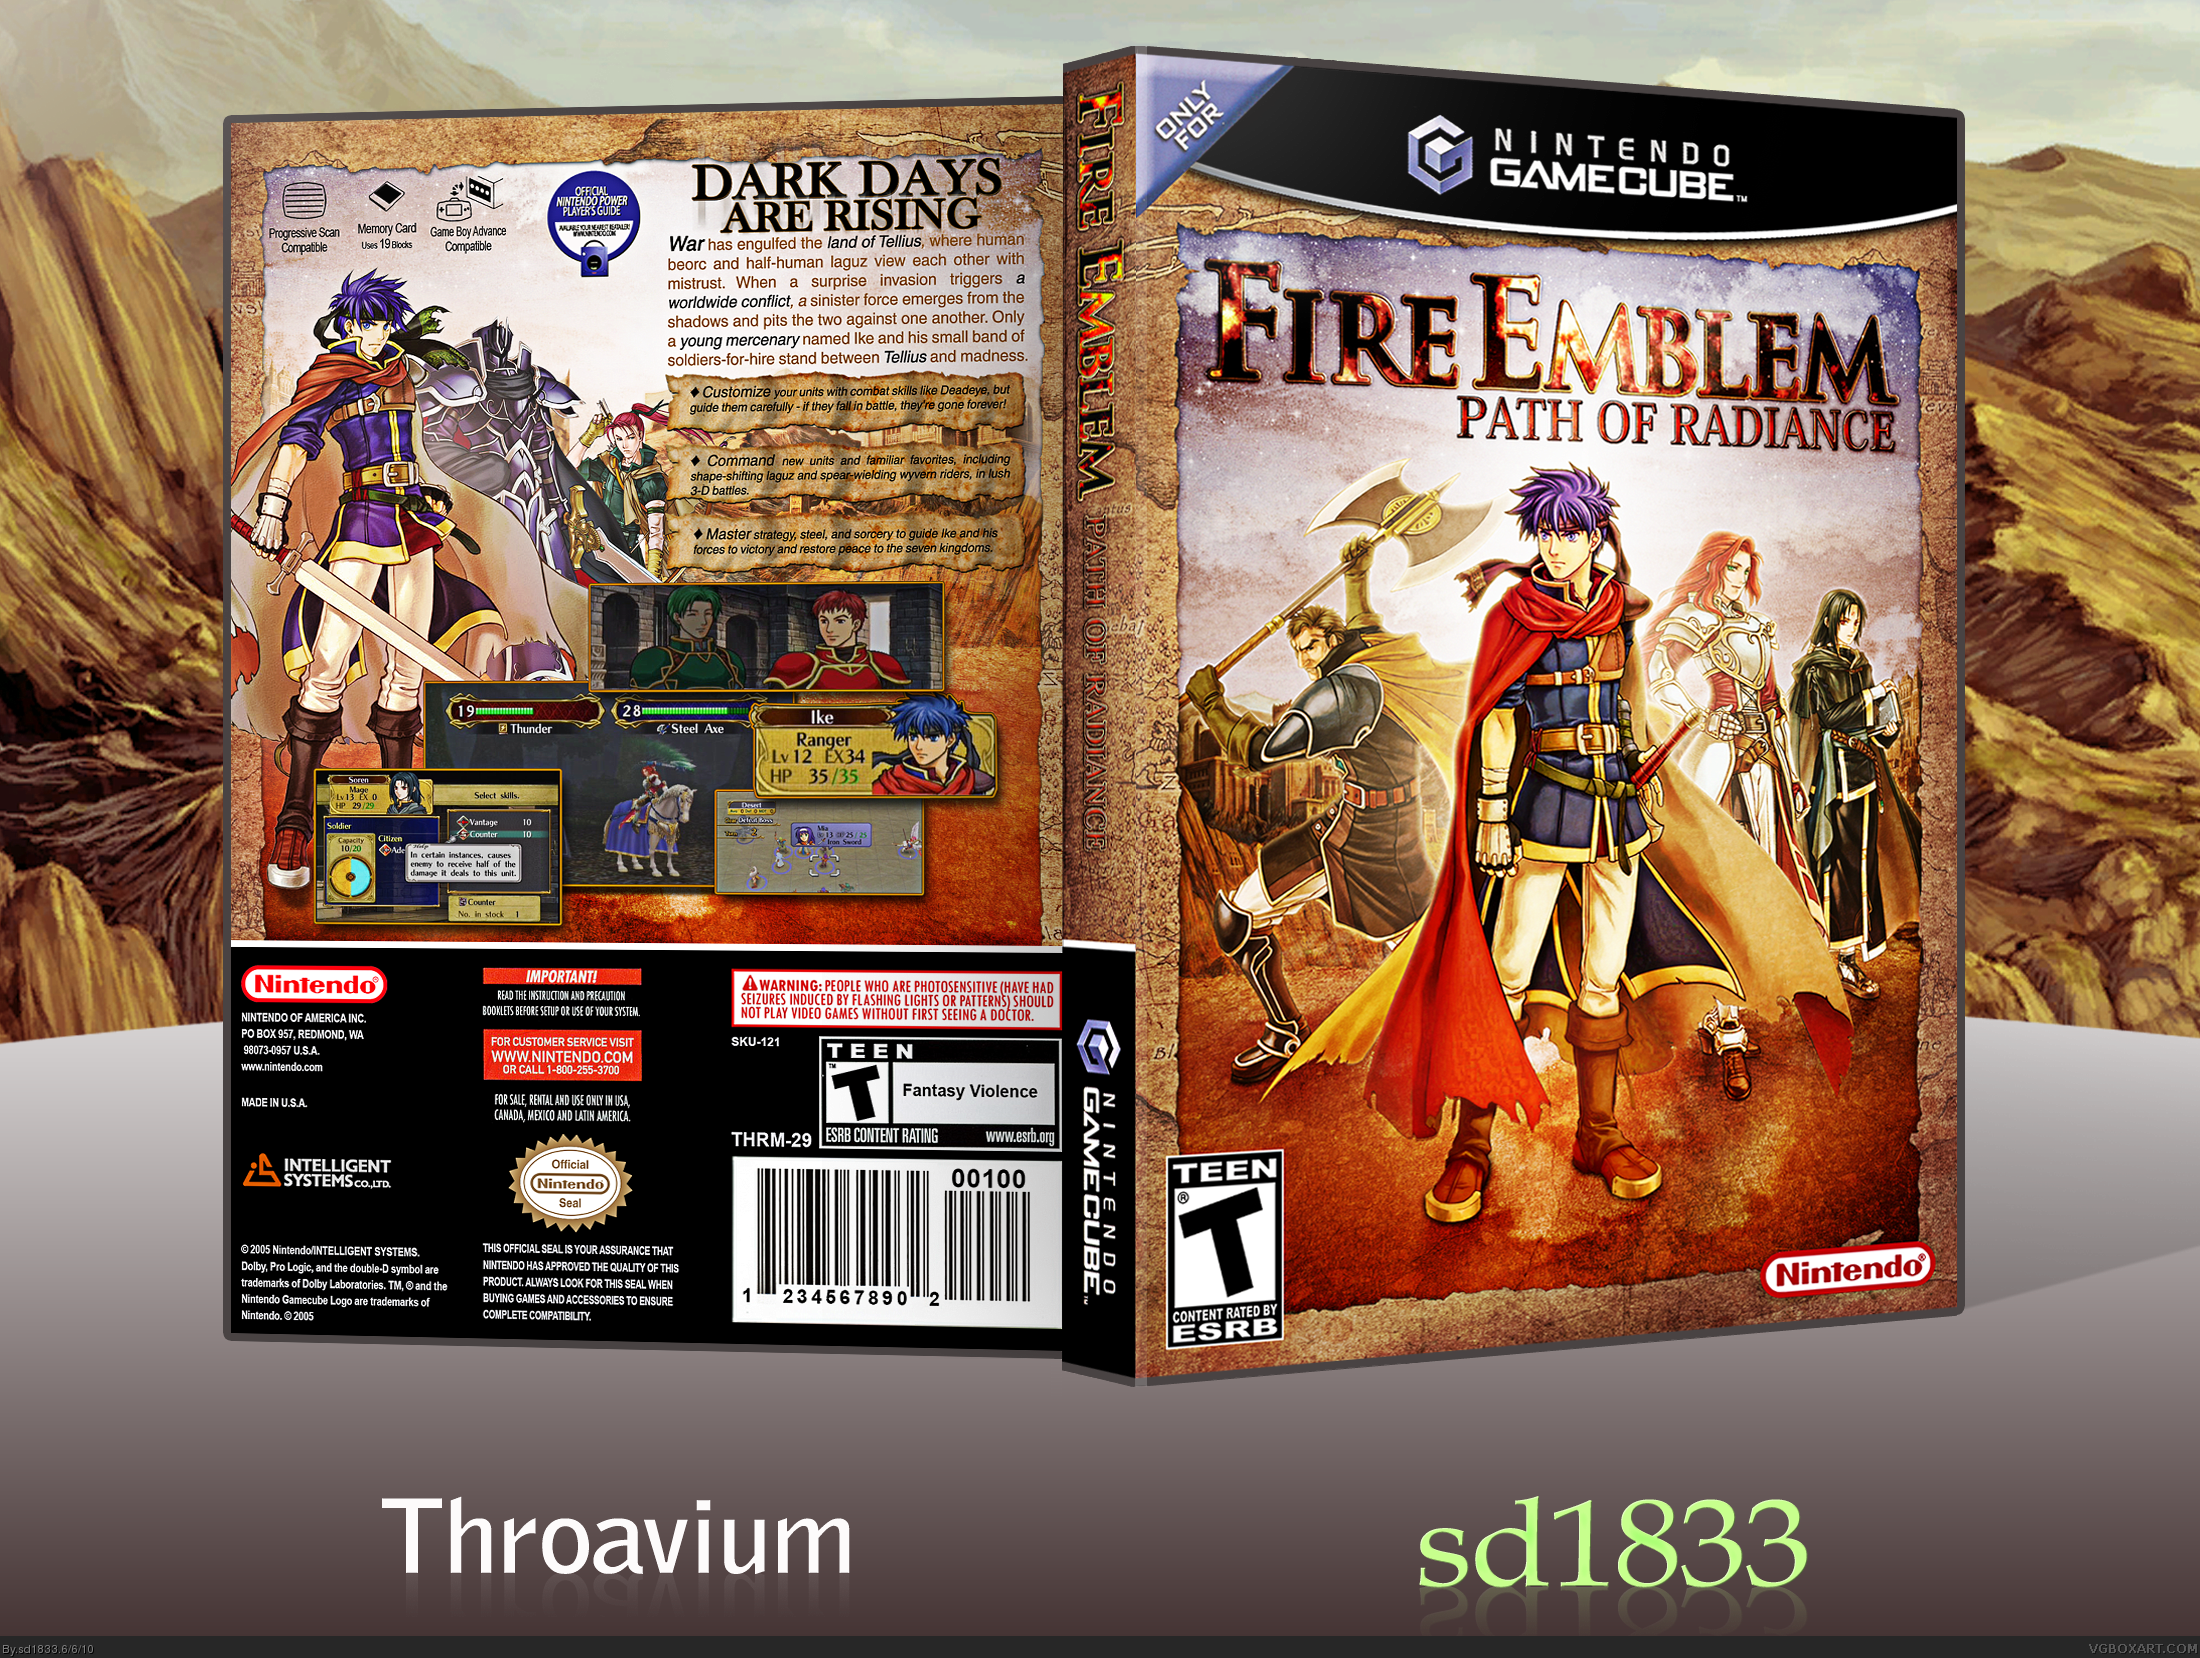 Viewing full size Fire Emblem: Path of Radiance box cover.